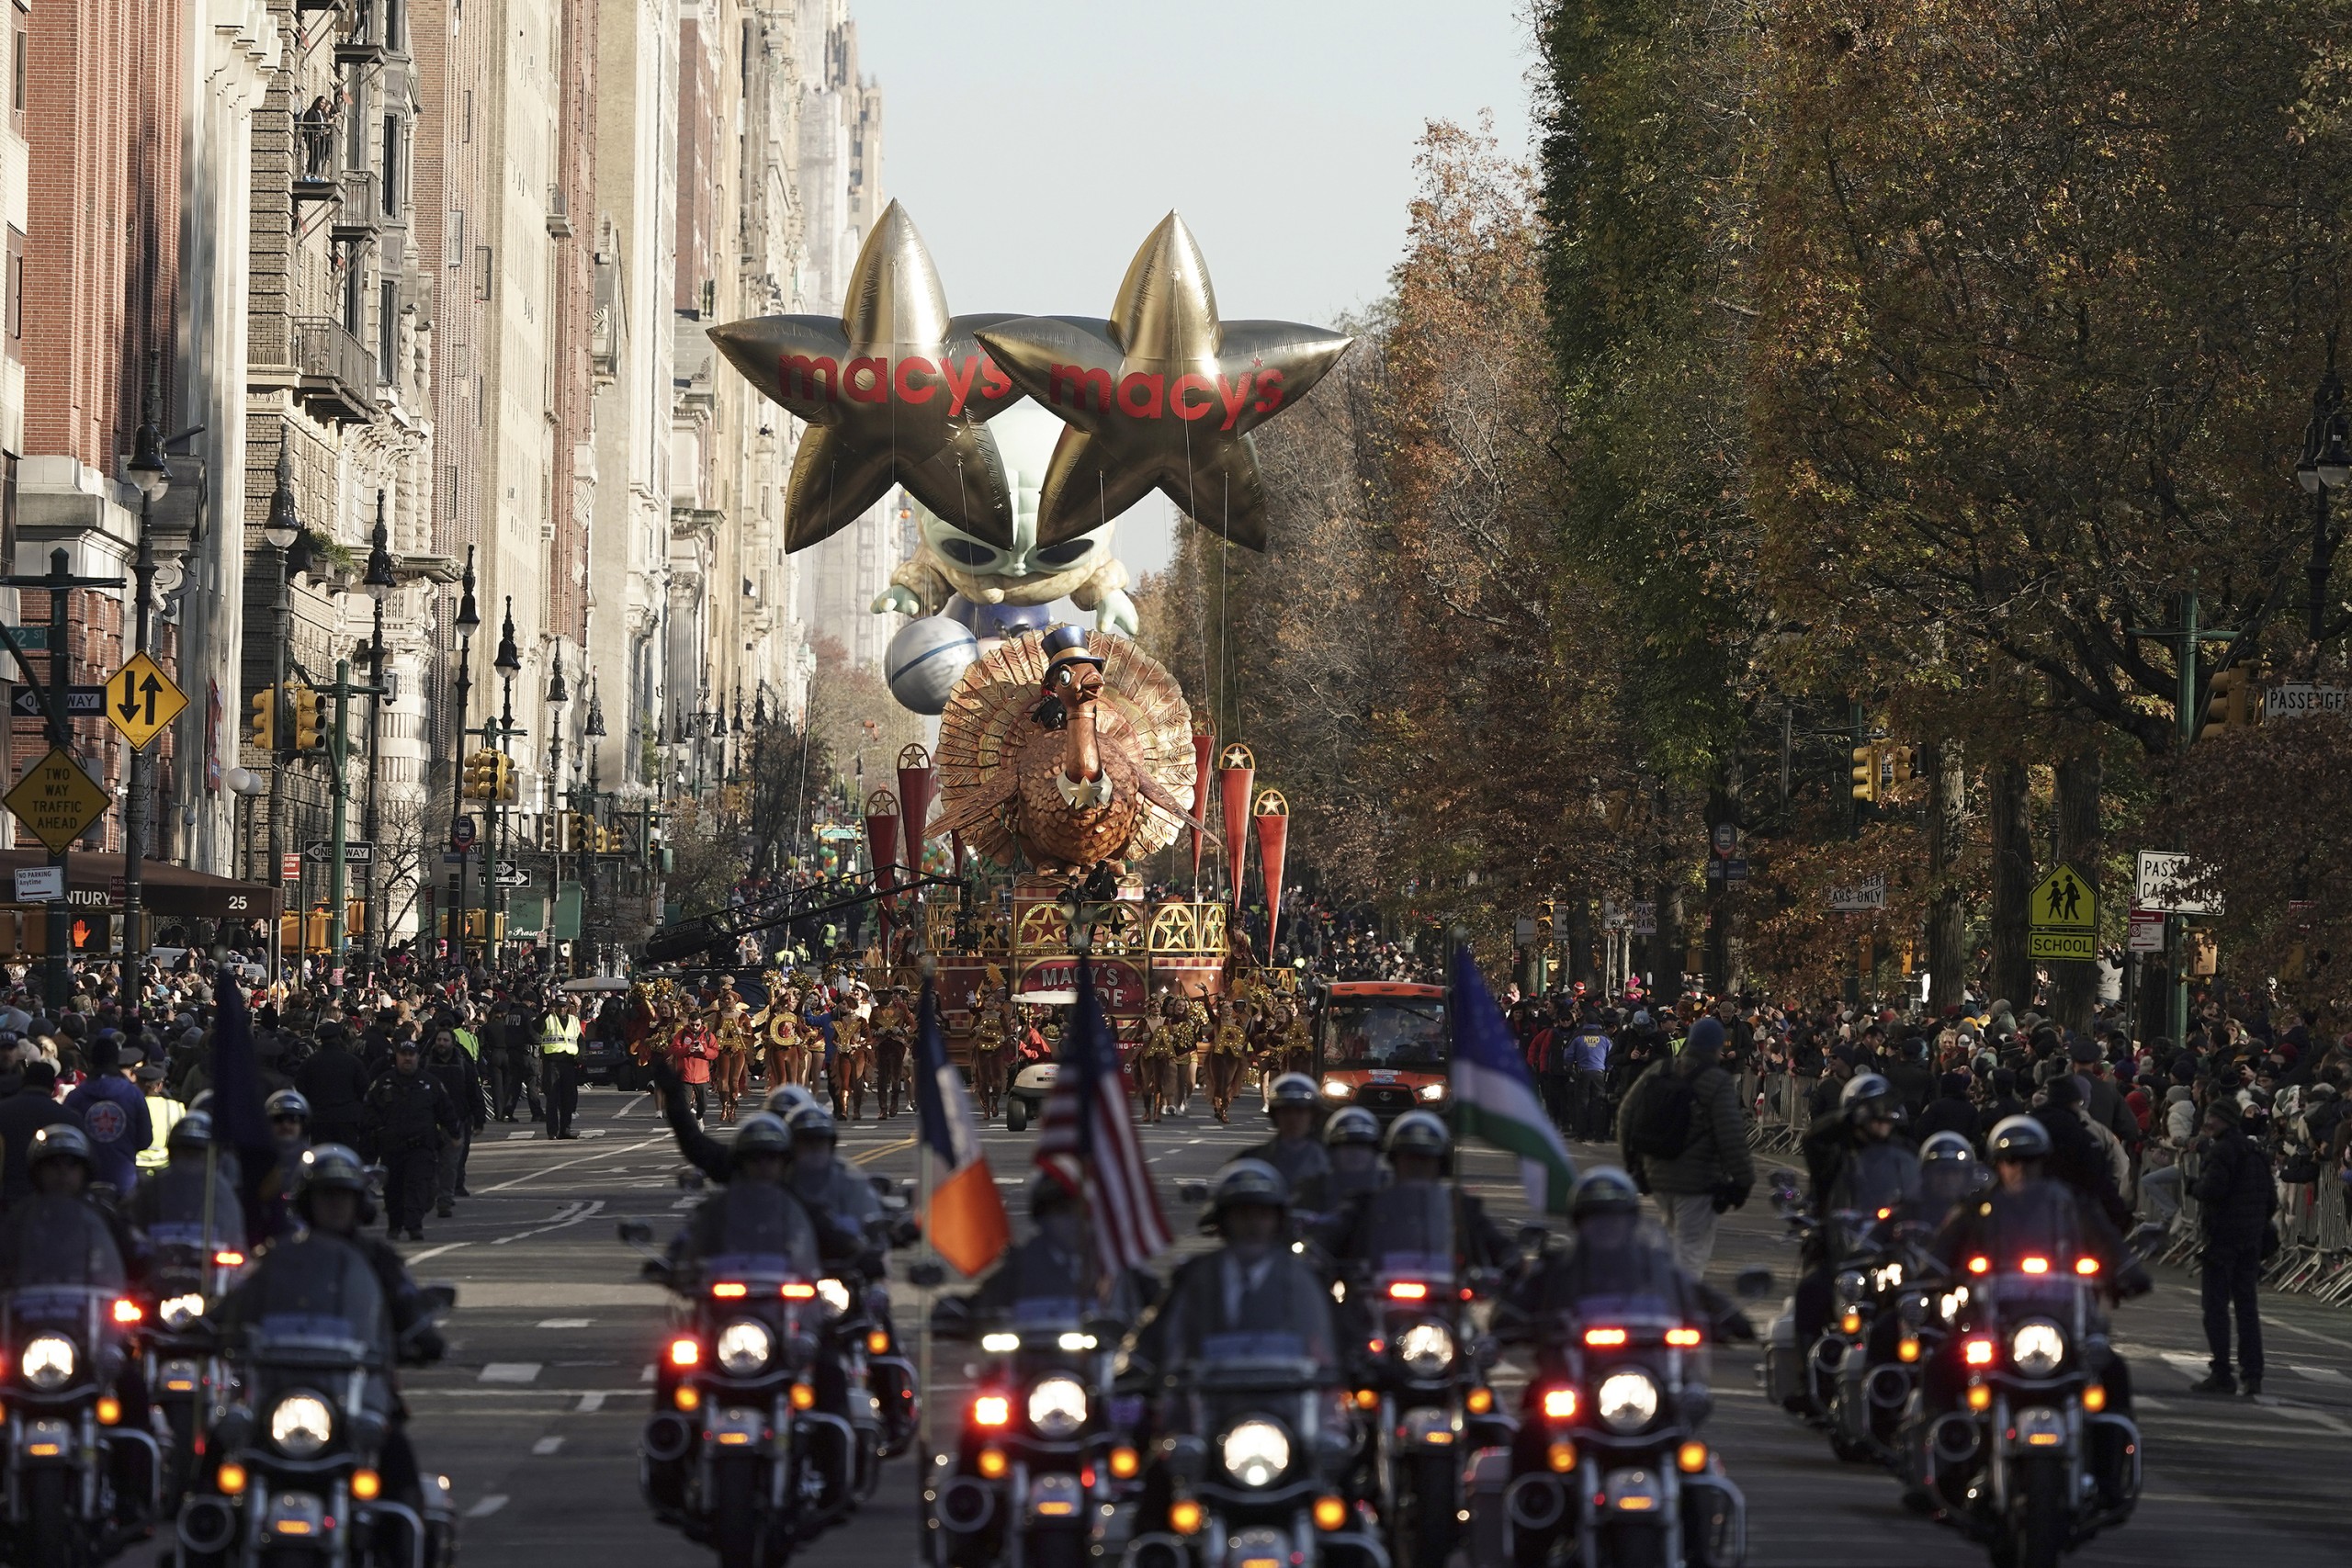 GALLERY: Highlights from Macy's Thanksgiving Day Parade